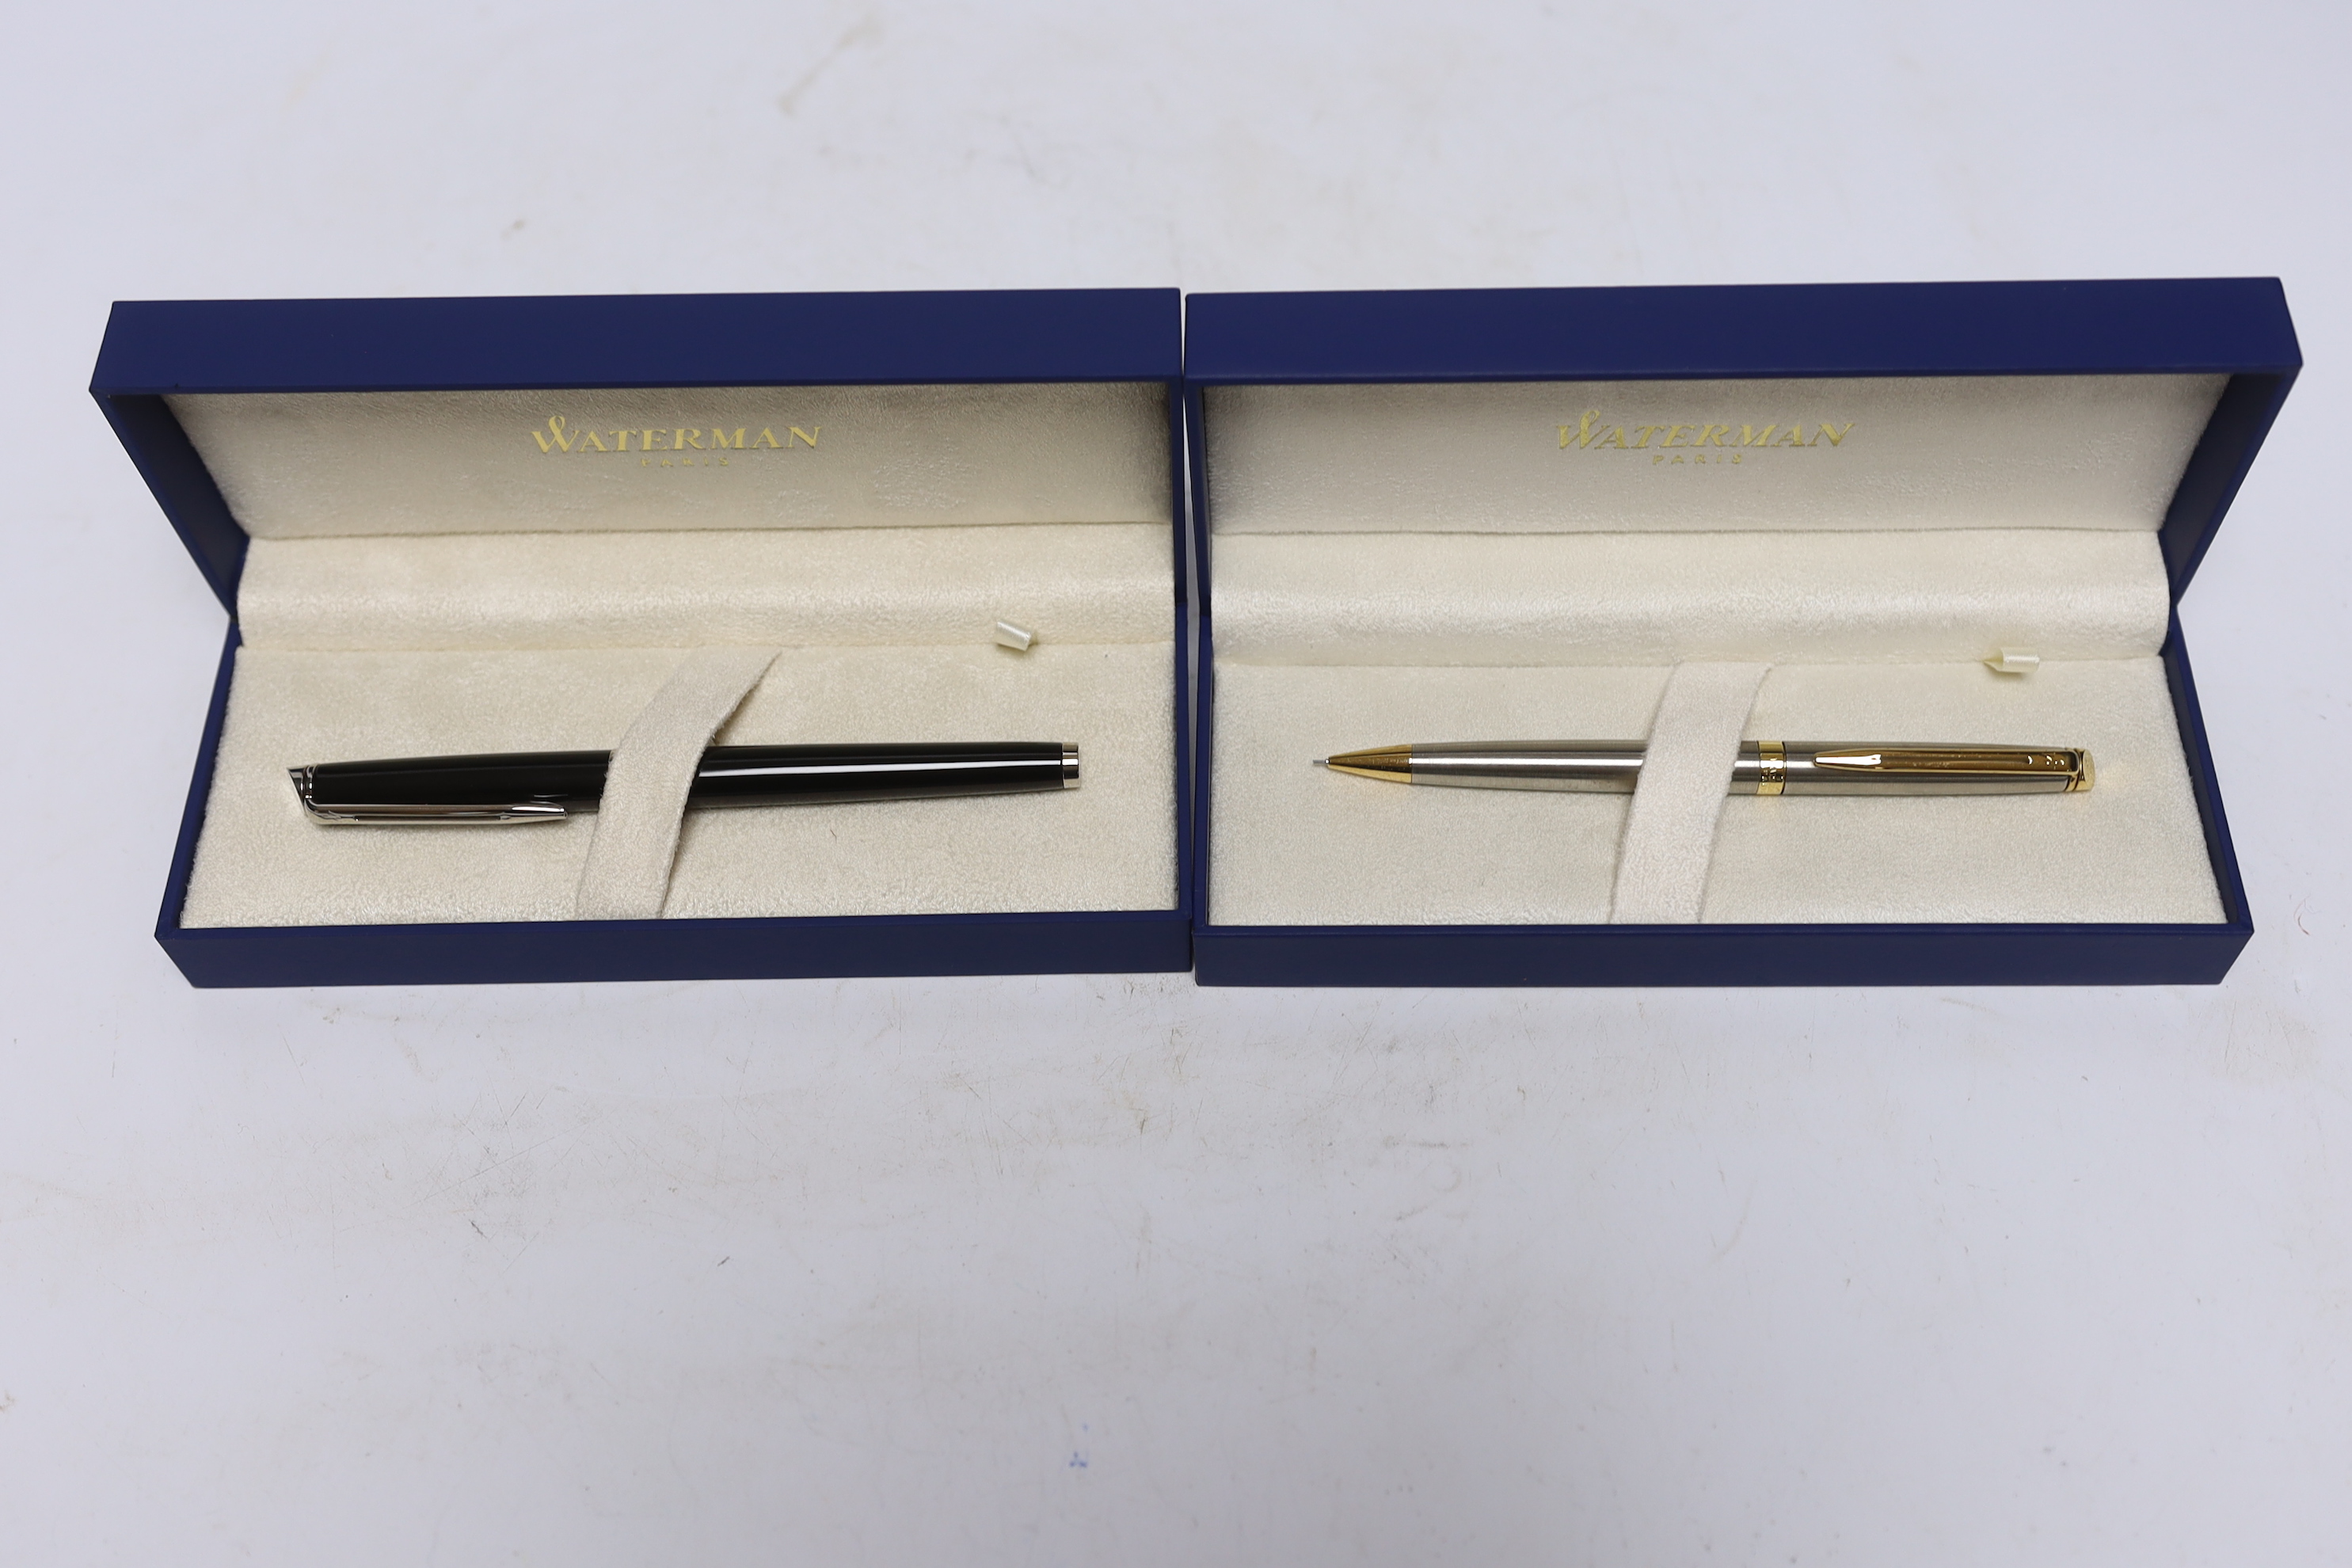 Four Waterman writing implements, including three propelling pencils; two Hemisphere pencils and an Expert pencil, and an Hemisphere fountain pen